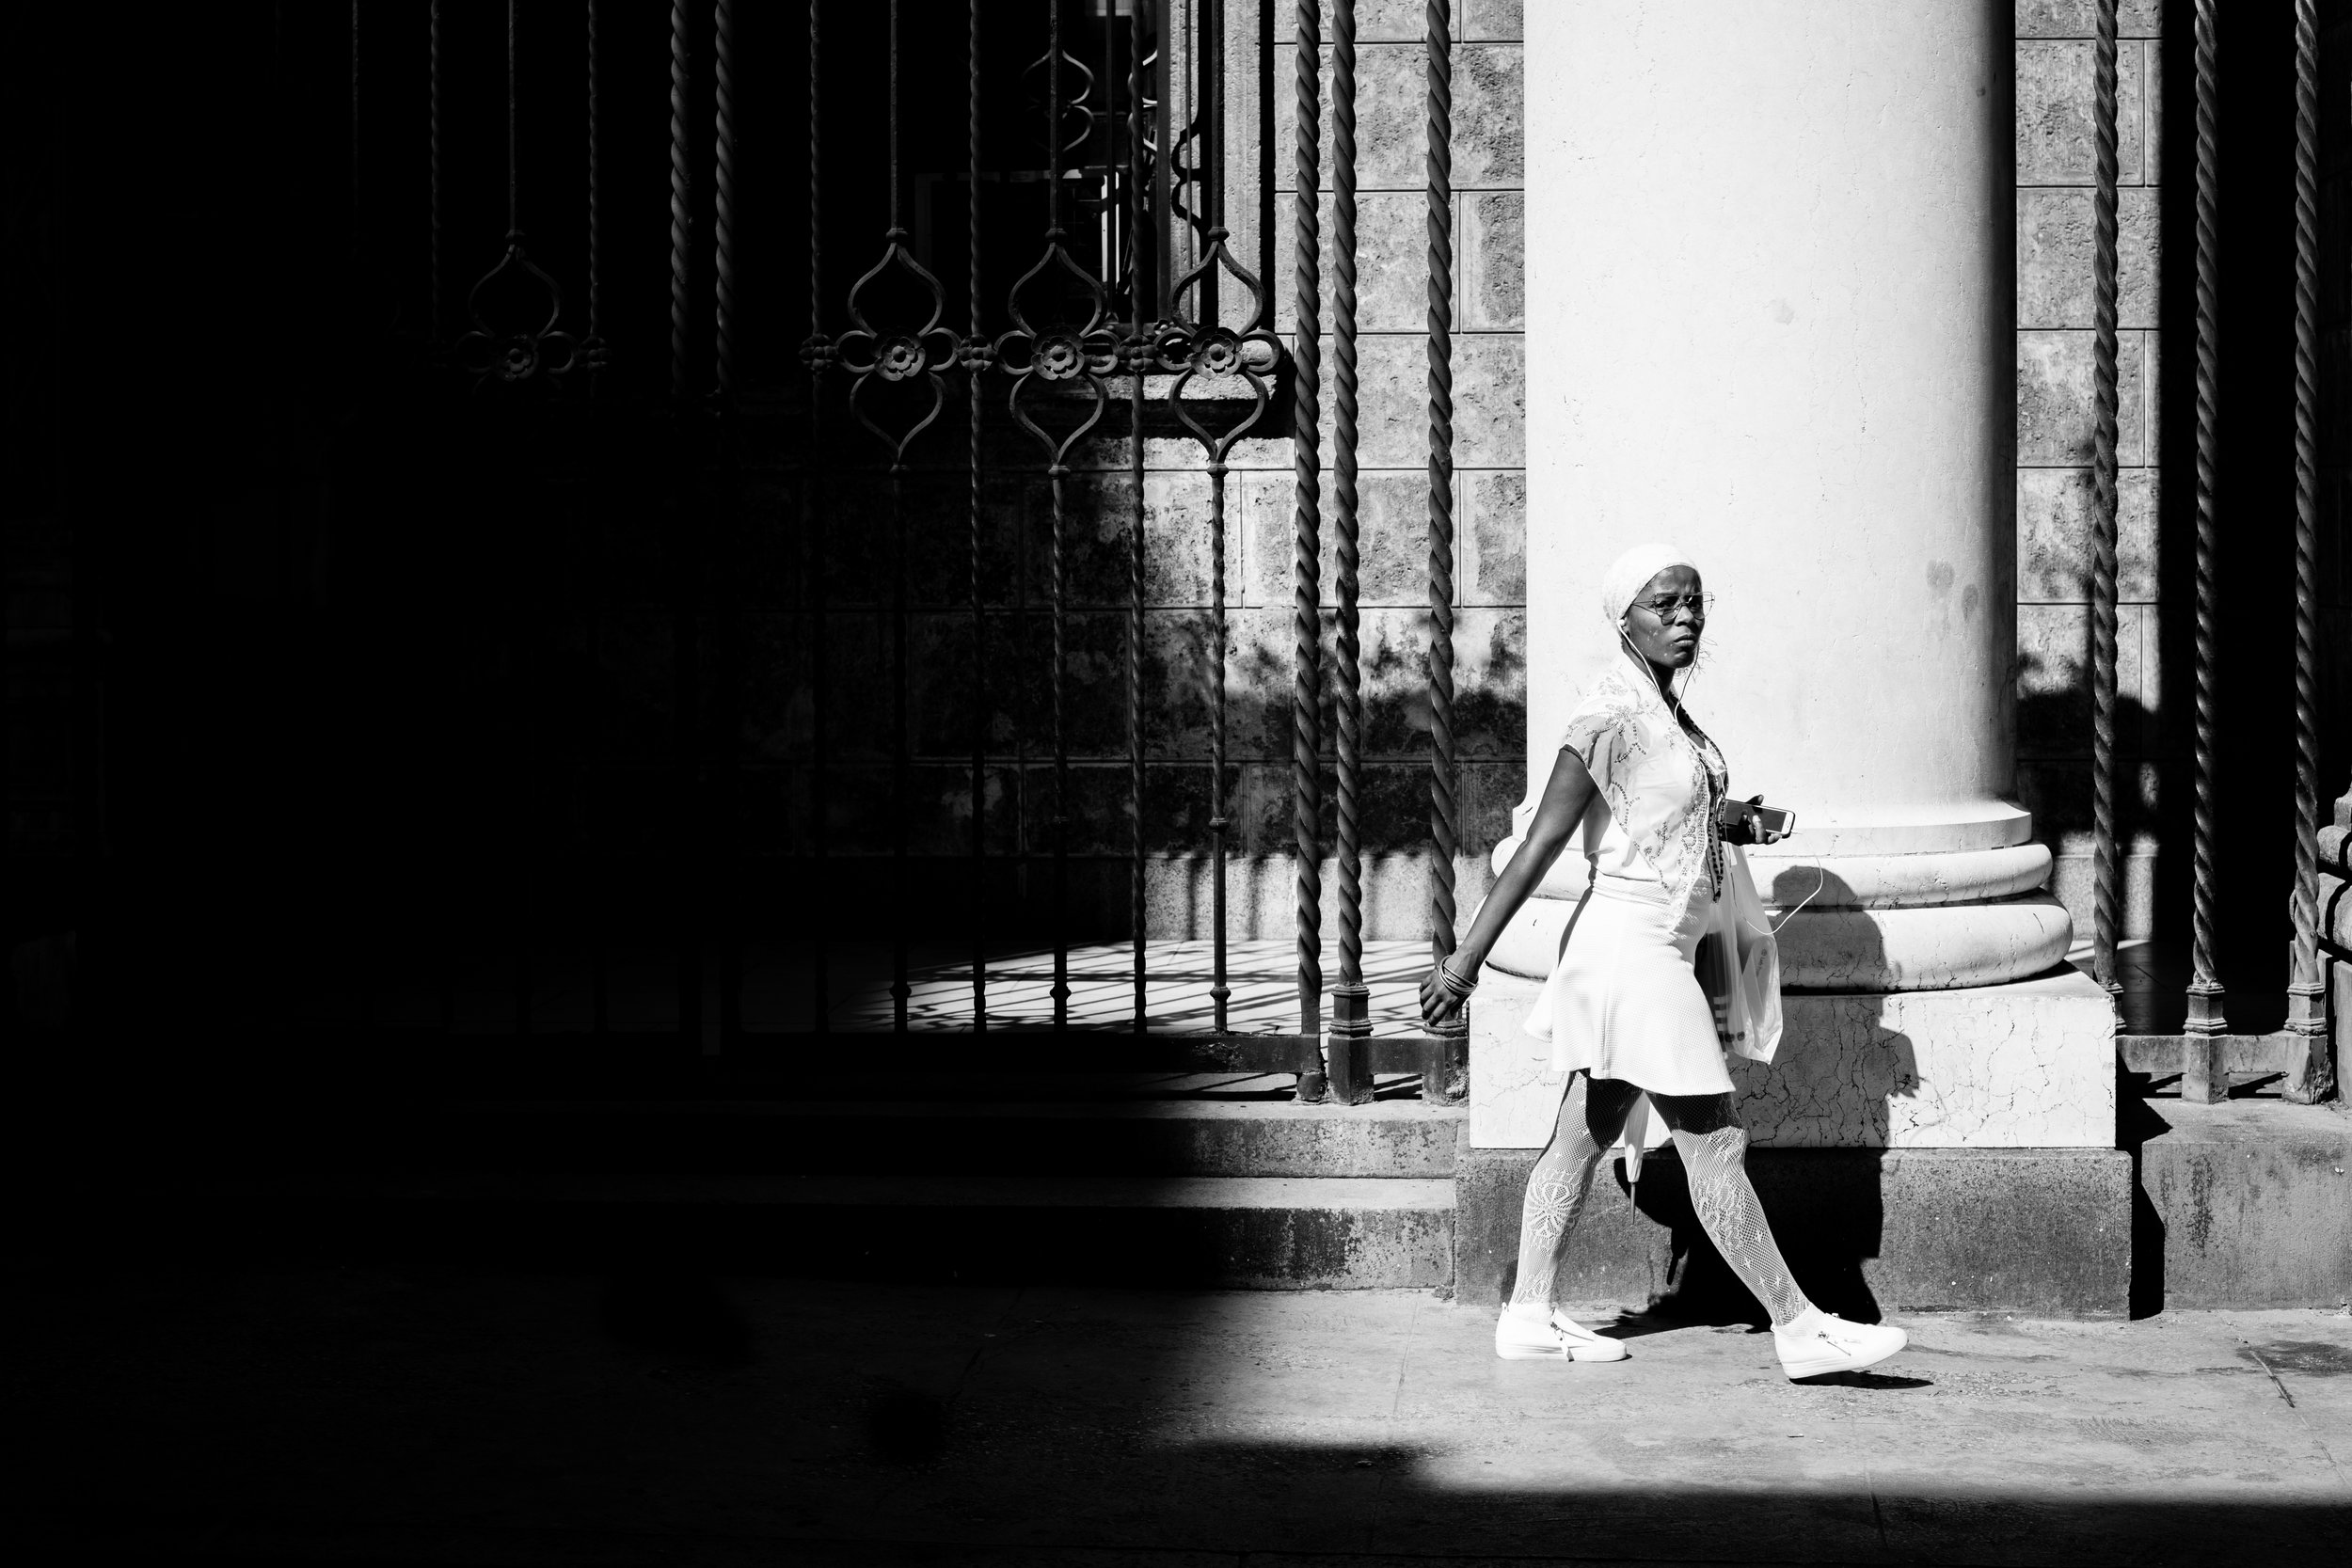 Using shadows to create a frame within a frame in La Habana, Cuba.